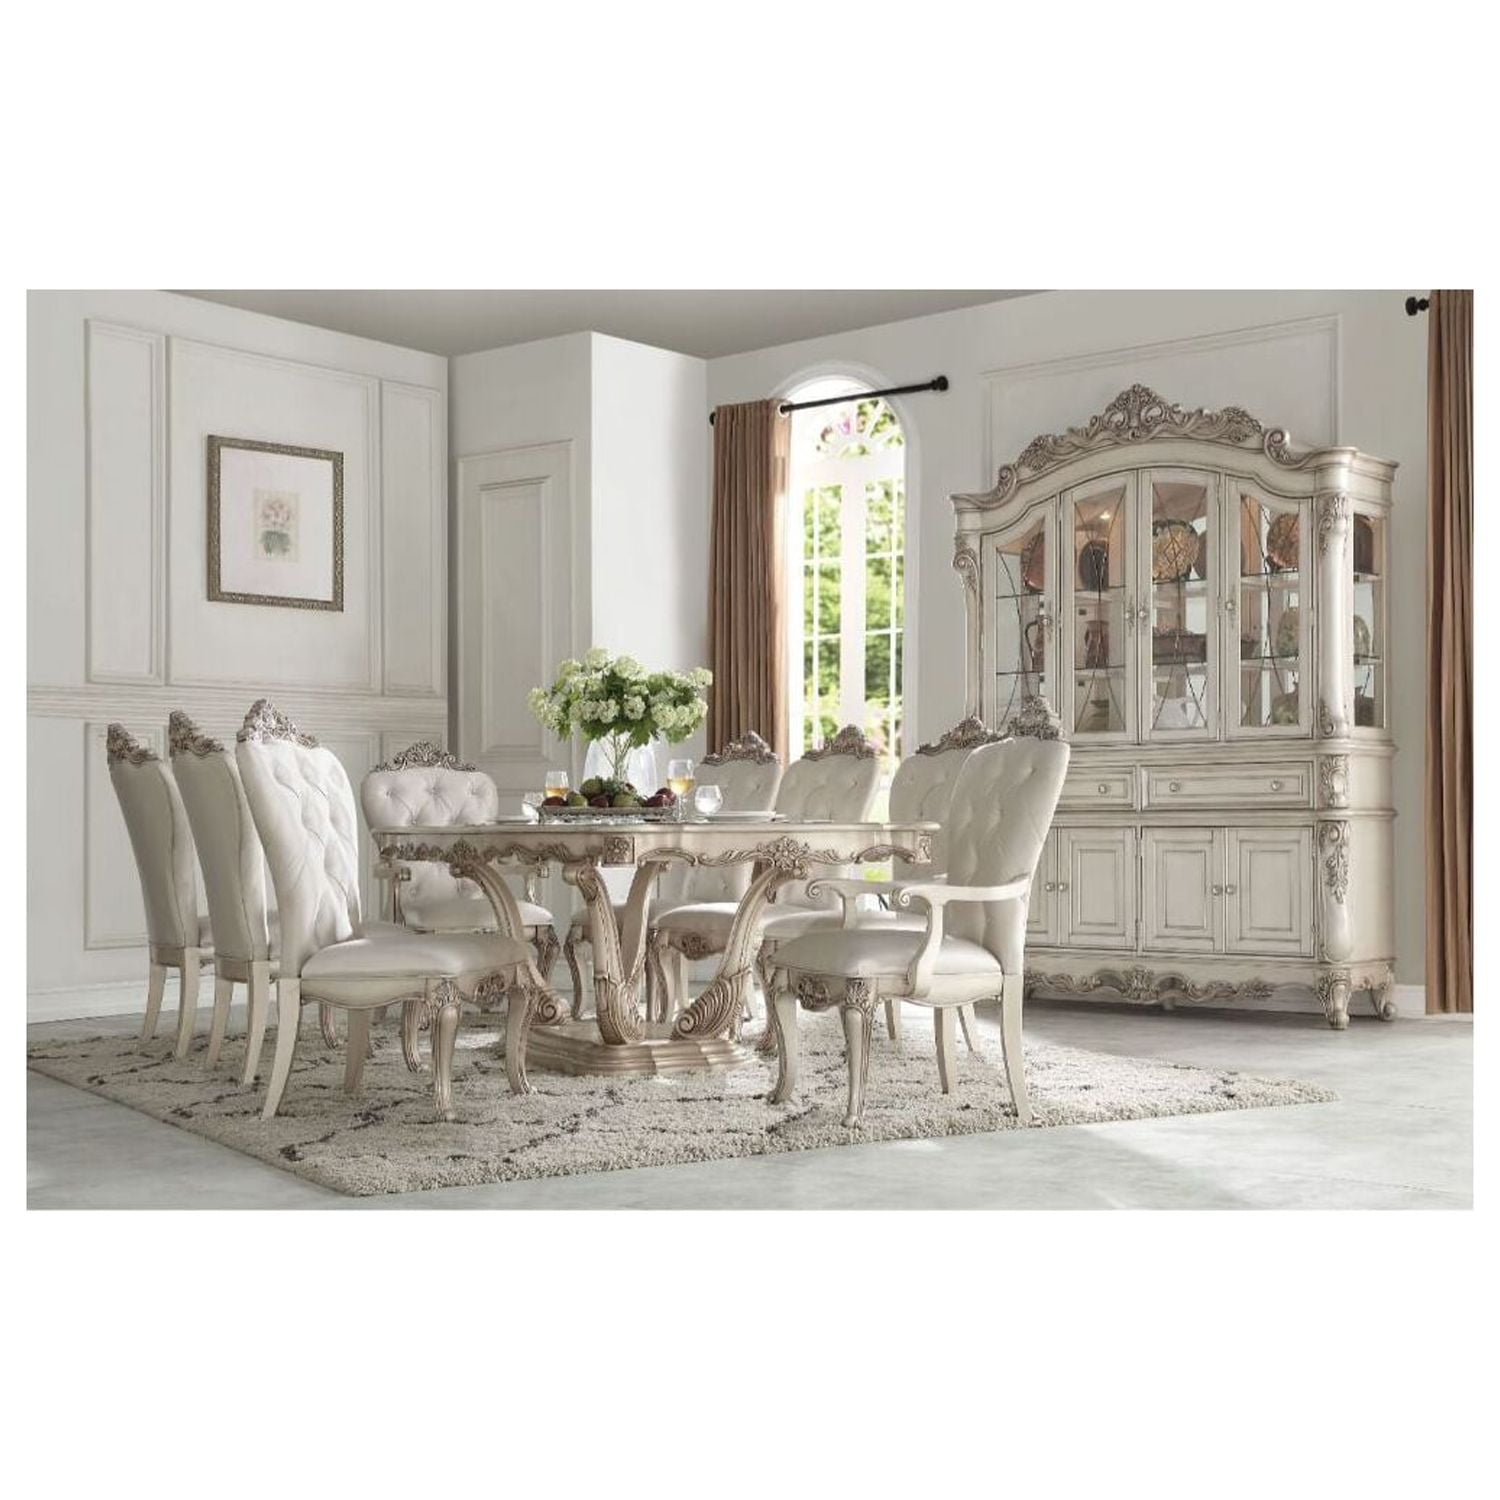 Picture of ACME 67440 2 Piece Gorsedd Dining Table with Pedestal, Antique White - 44 x 84 - 102 in.